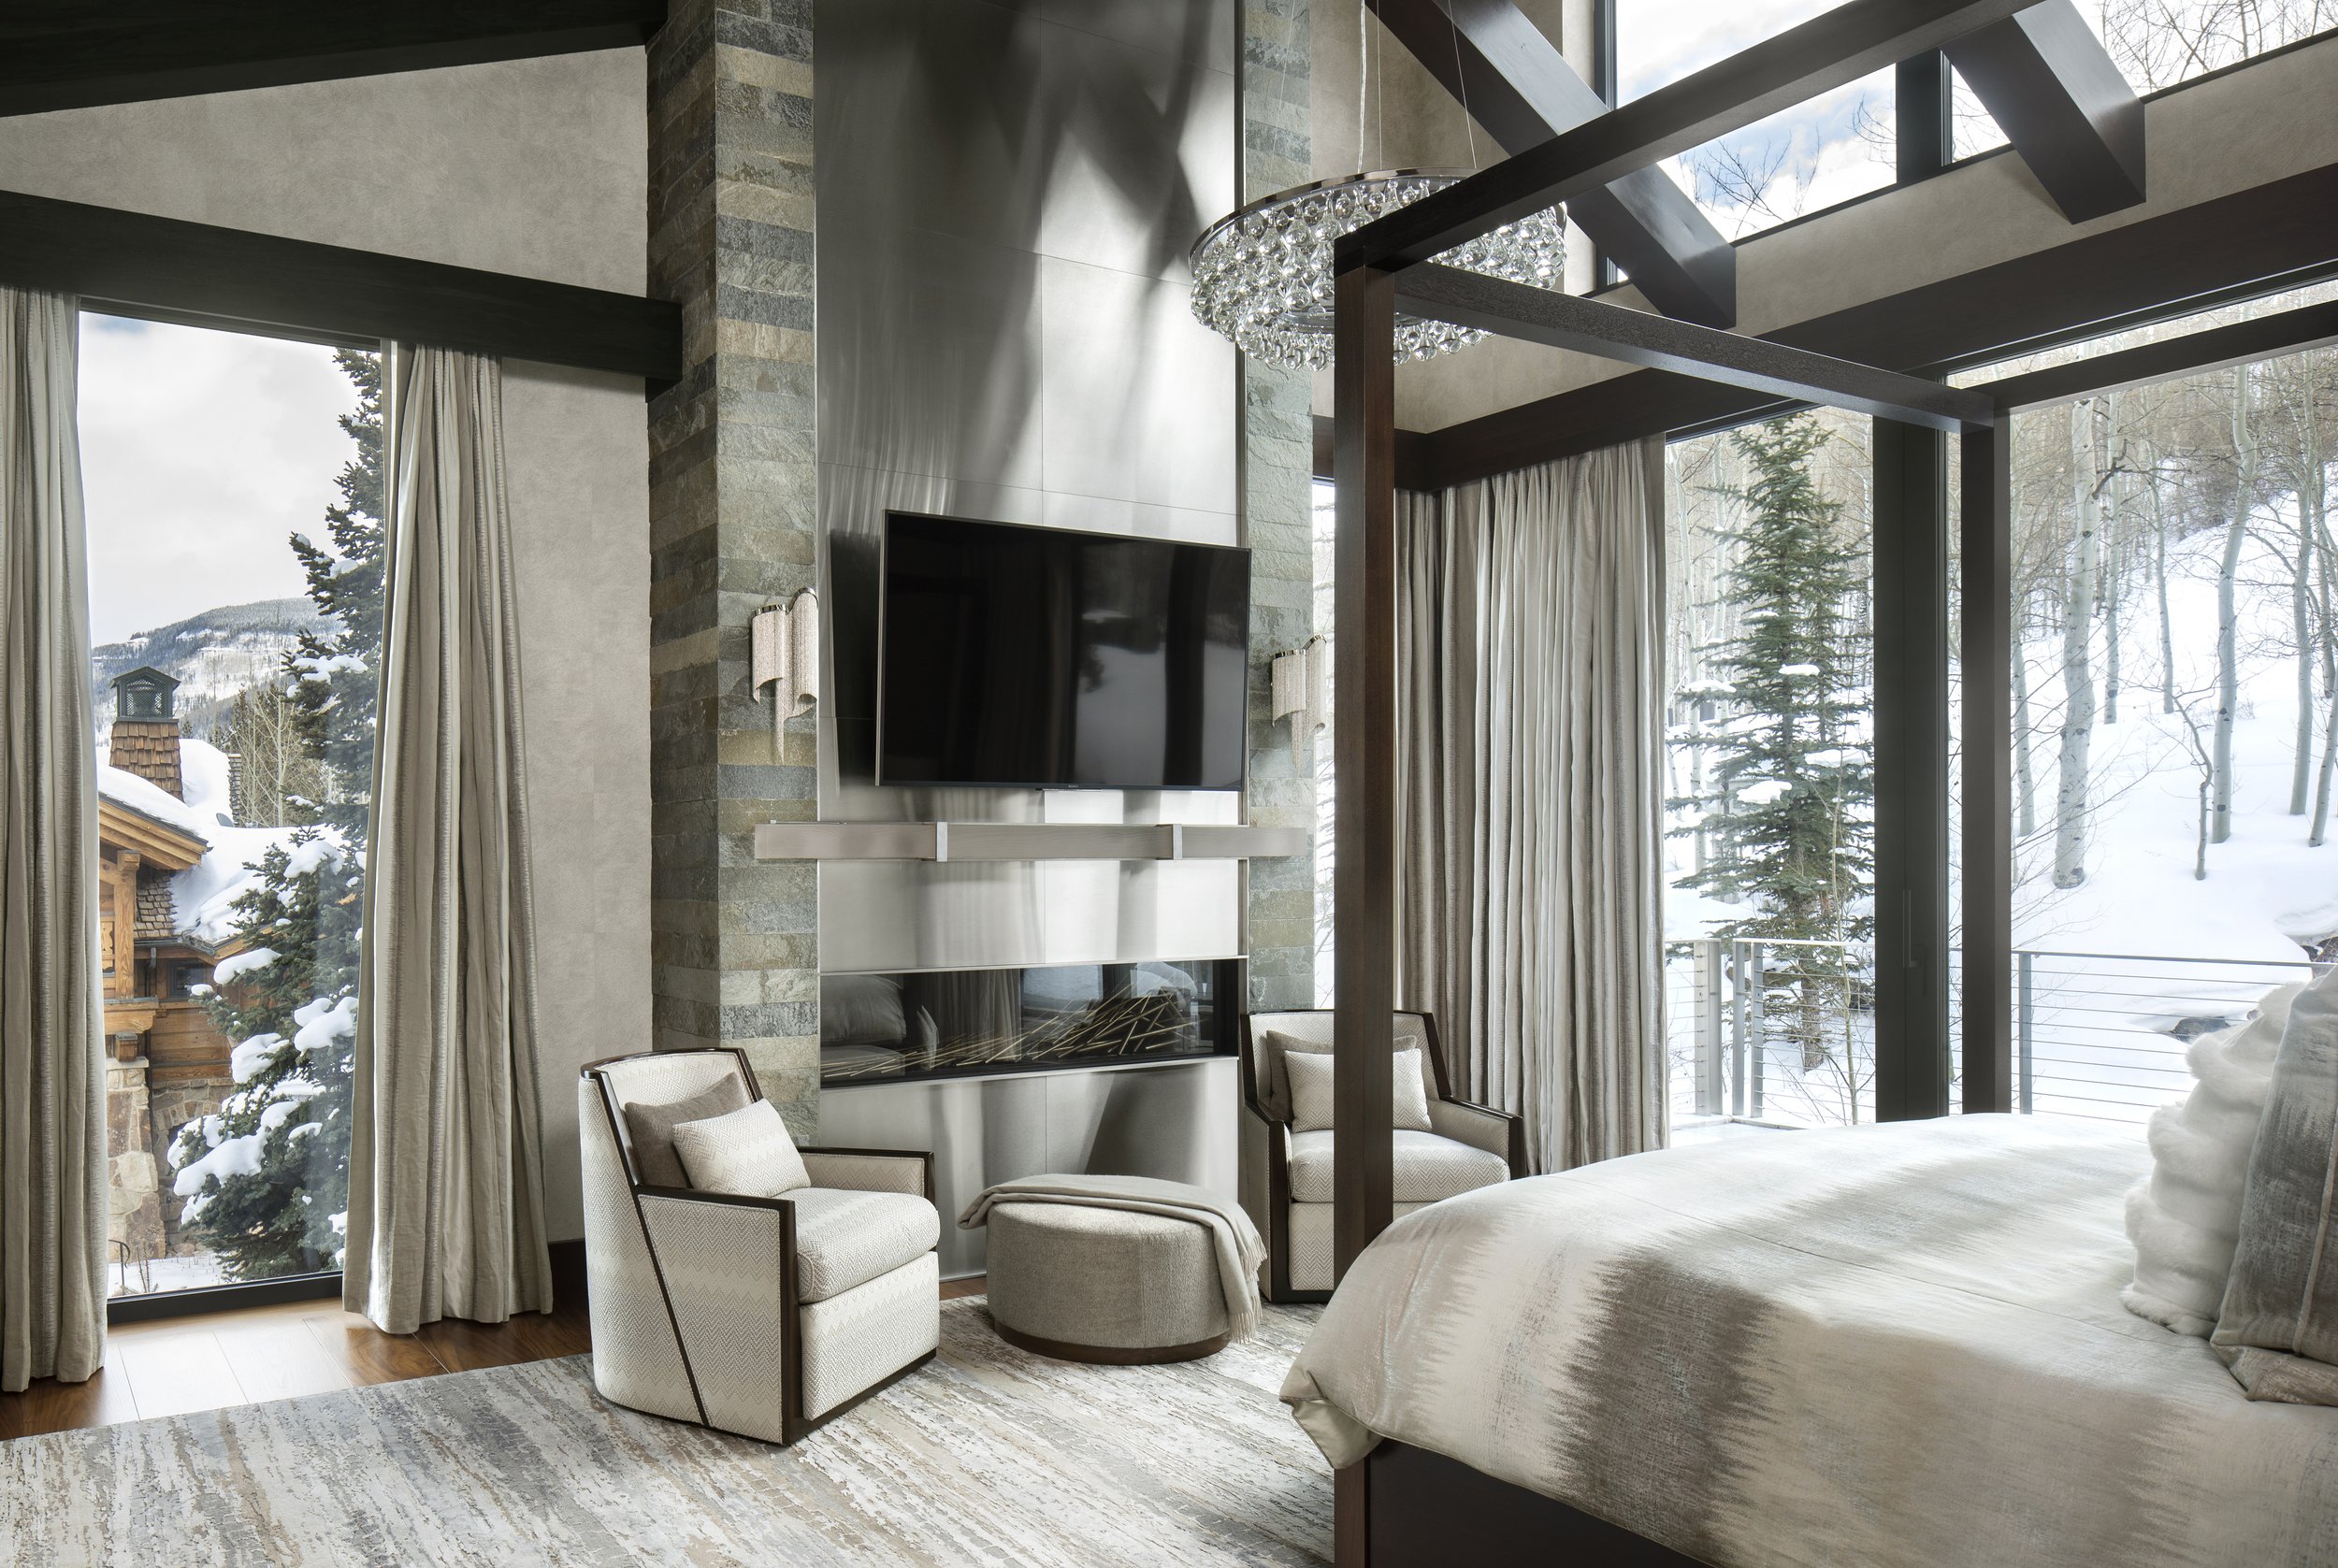 9-relaxing-sanctuary-modern-bedroom-vail-mountain-view-natural-light-interior-designs.jpg